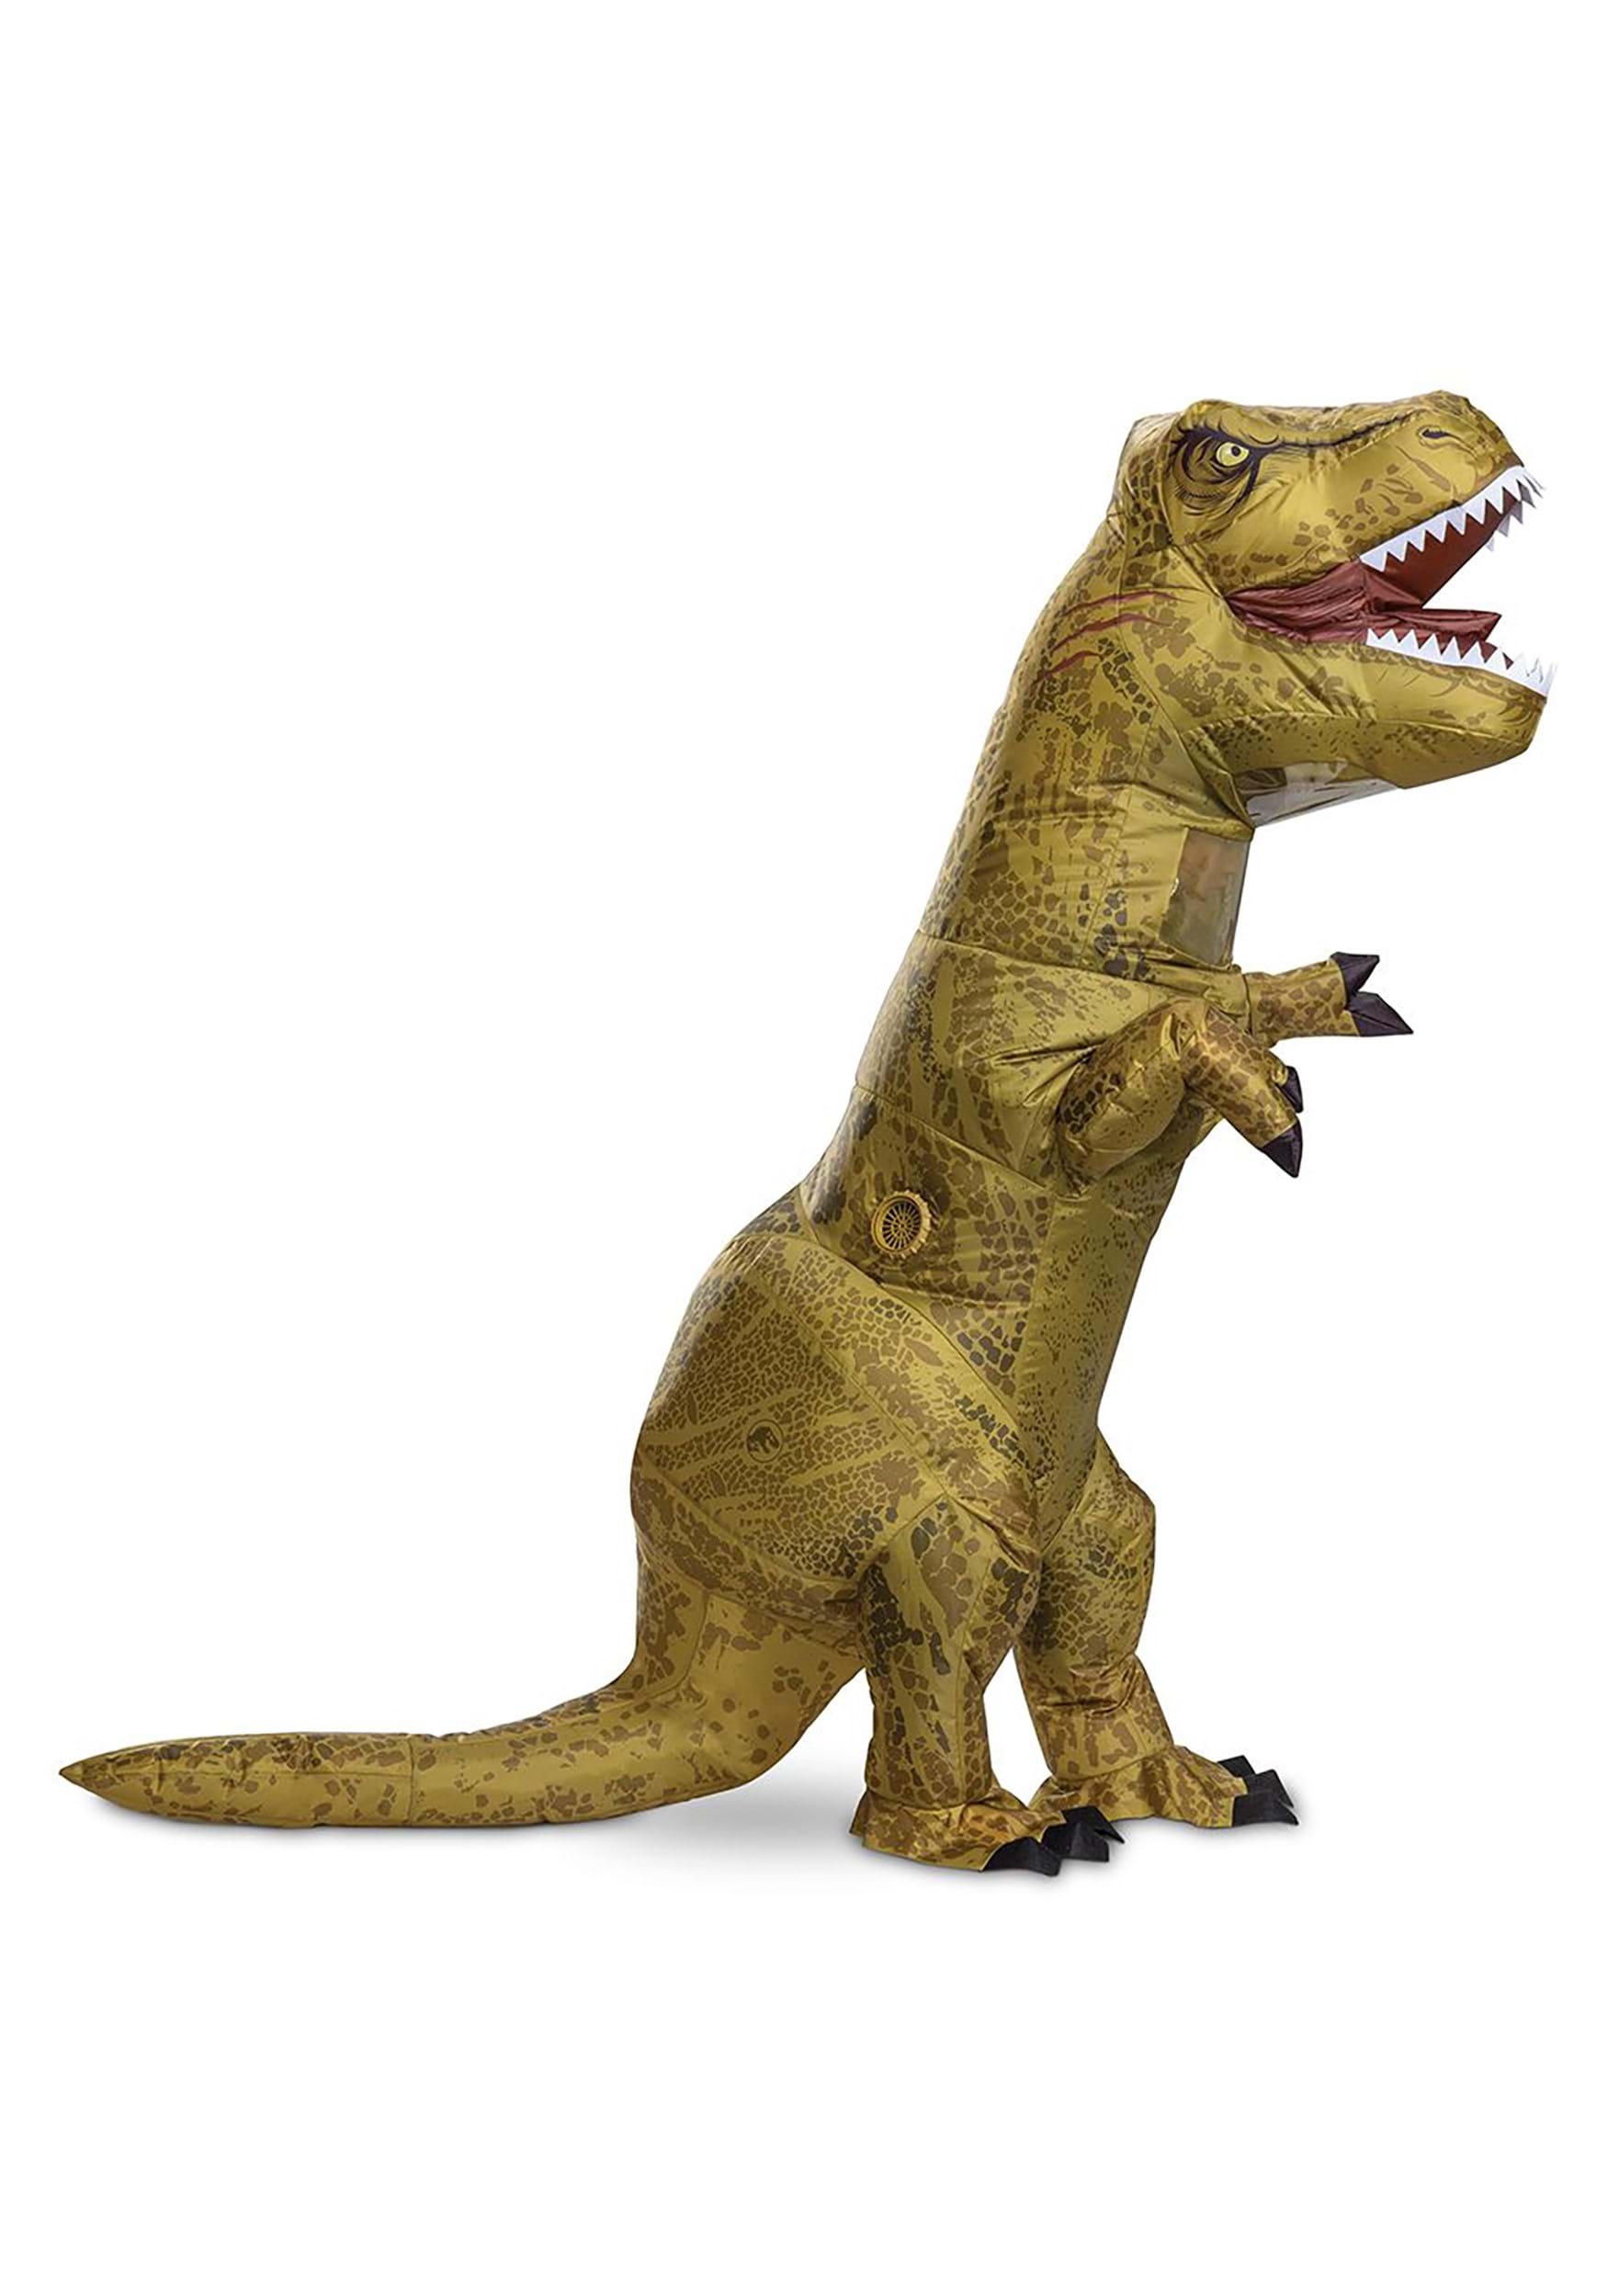 Jurassic World T-Rex Inflatable Costume For Kids